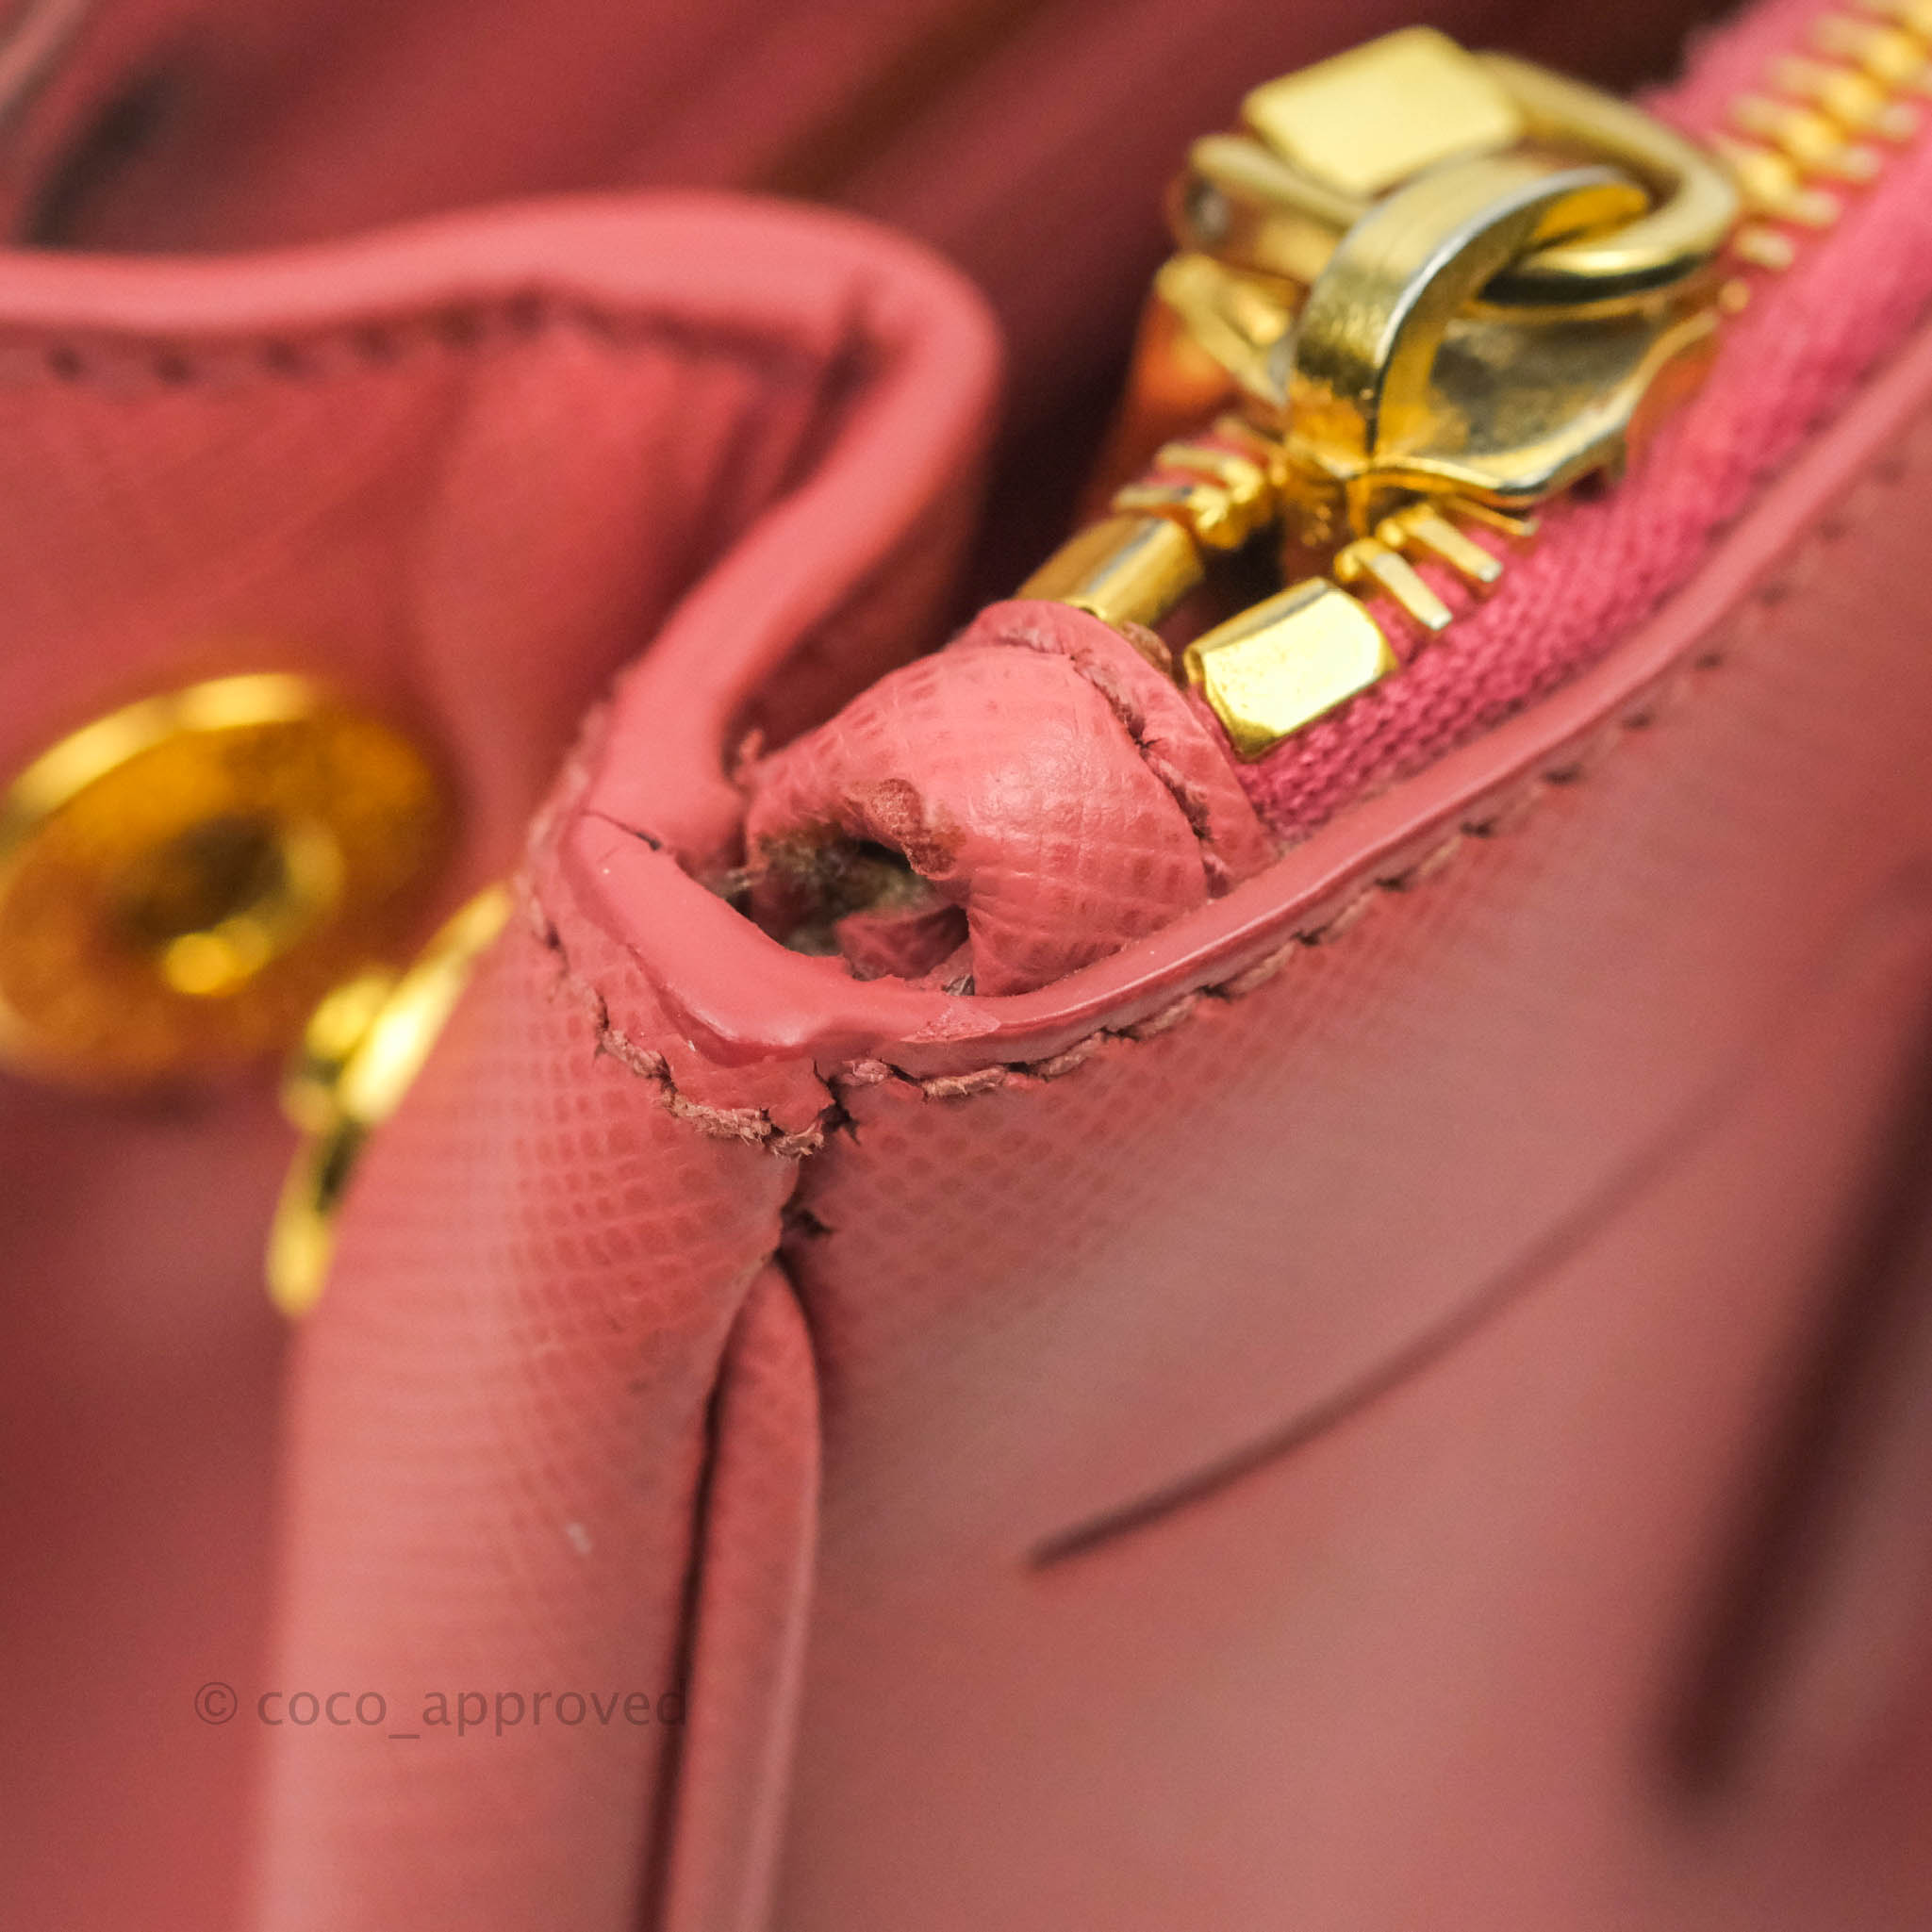 Prada Tamaris Pink Large Saffiano Lux Leather Tote Bag For Sale at 1stDibs